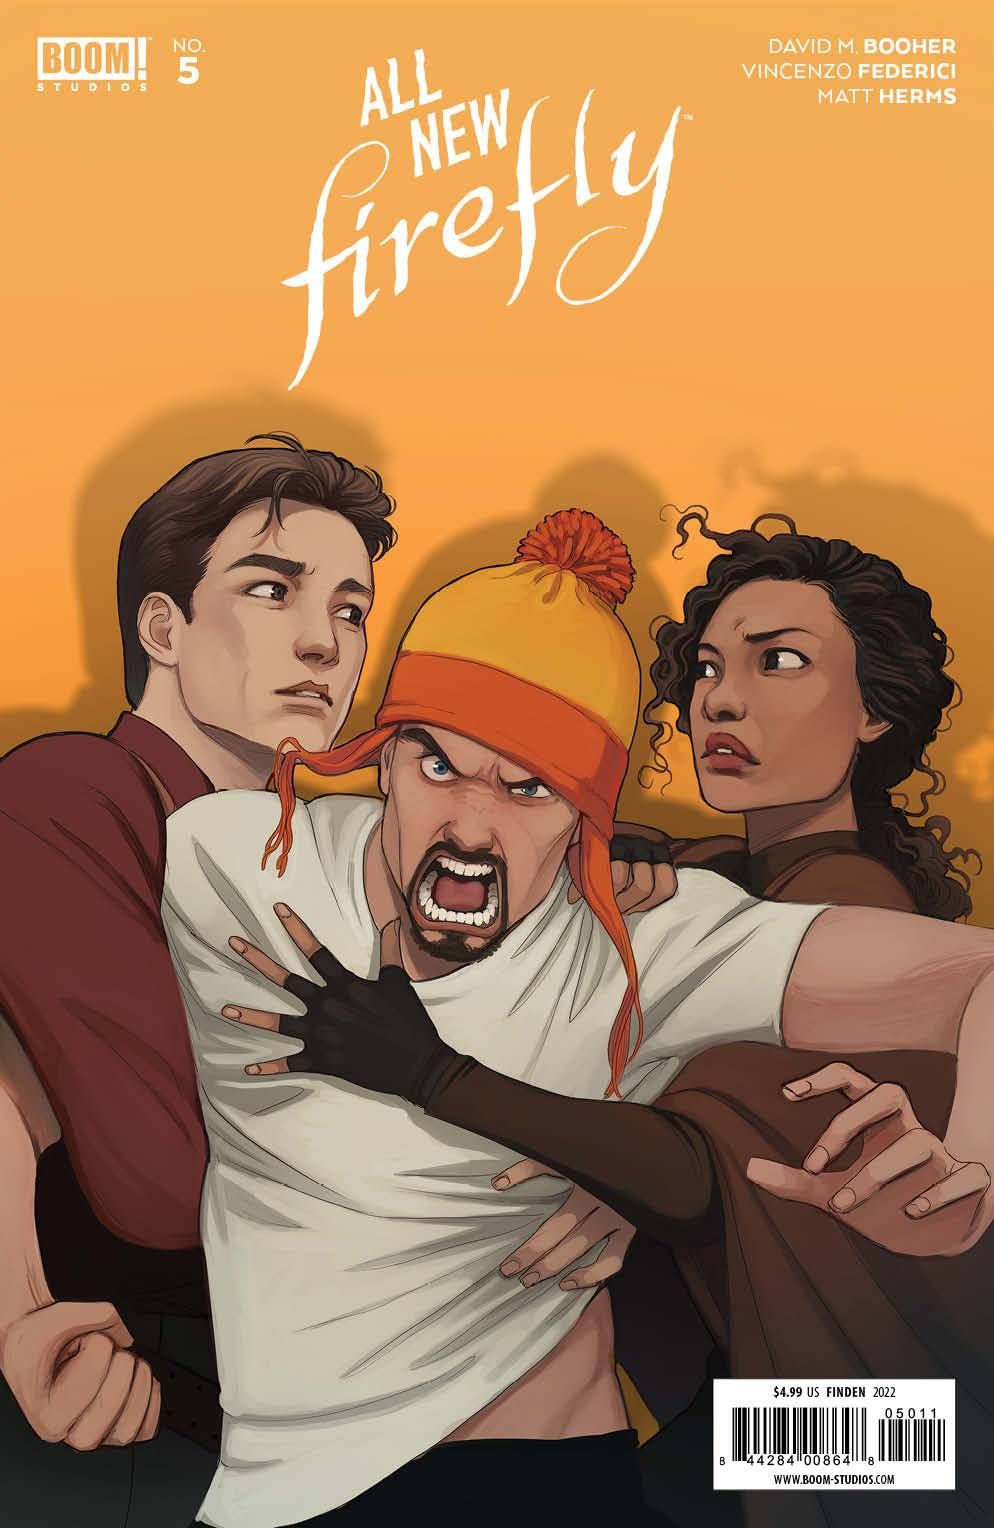 All New Firefly #5 Comic